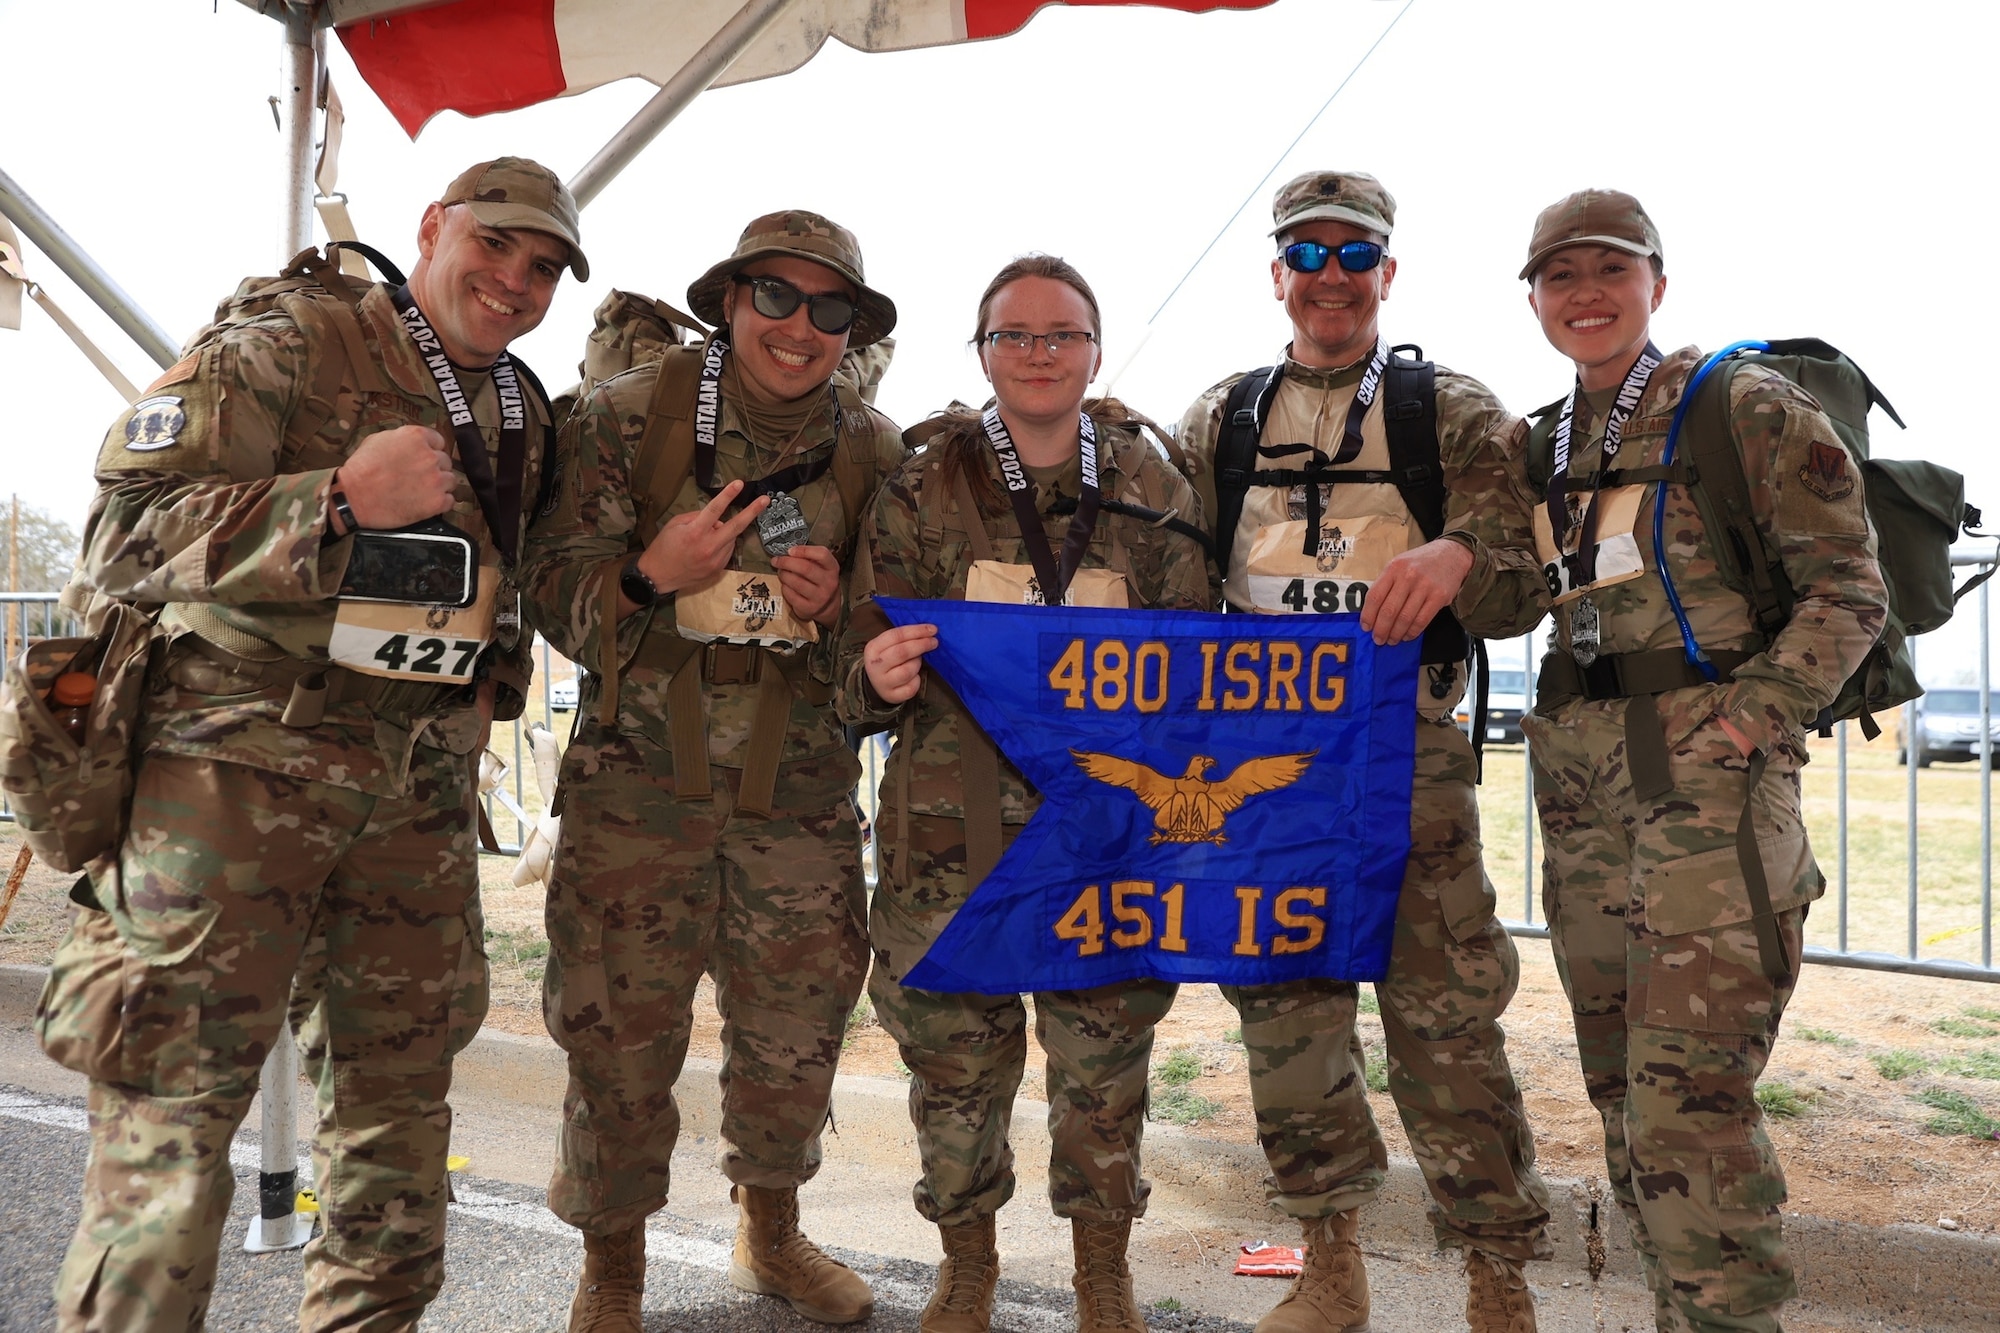 Current and former members of the 451st Intelligence Squadron, at the Bataan Memorial Death March Finish Liner, after finishing a grueling 26-mile ruck march, competing in the co-ed heavy division, White Sands Missile Range, New Mexico.